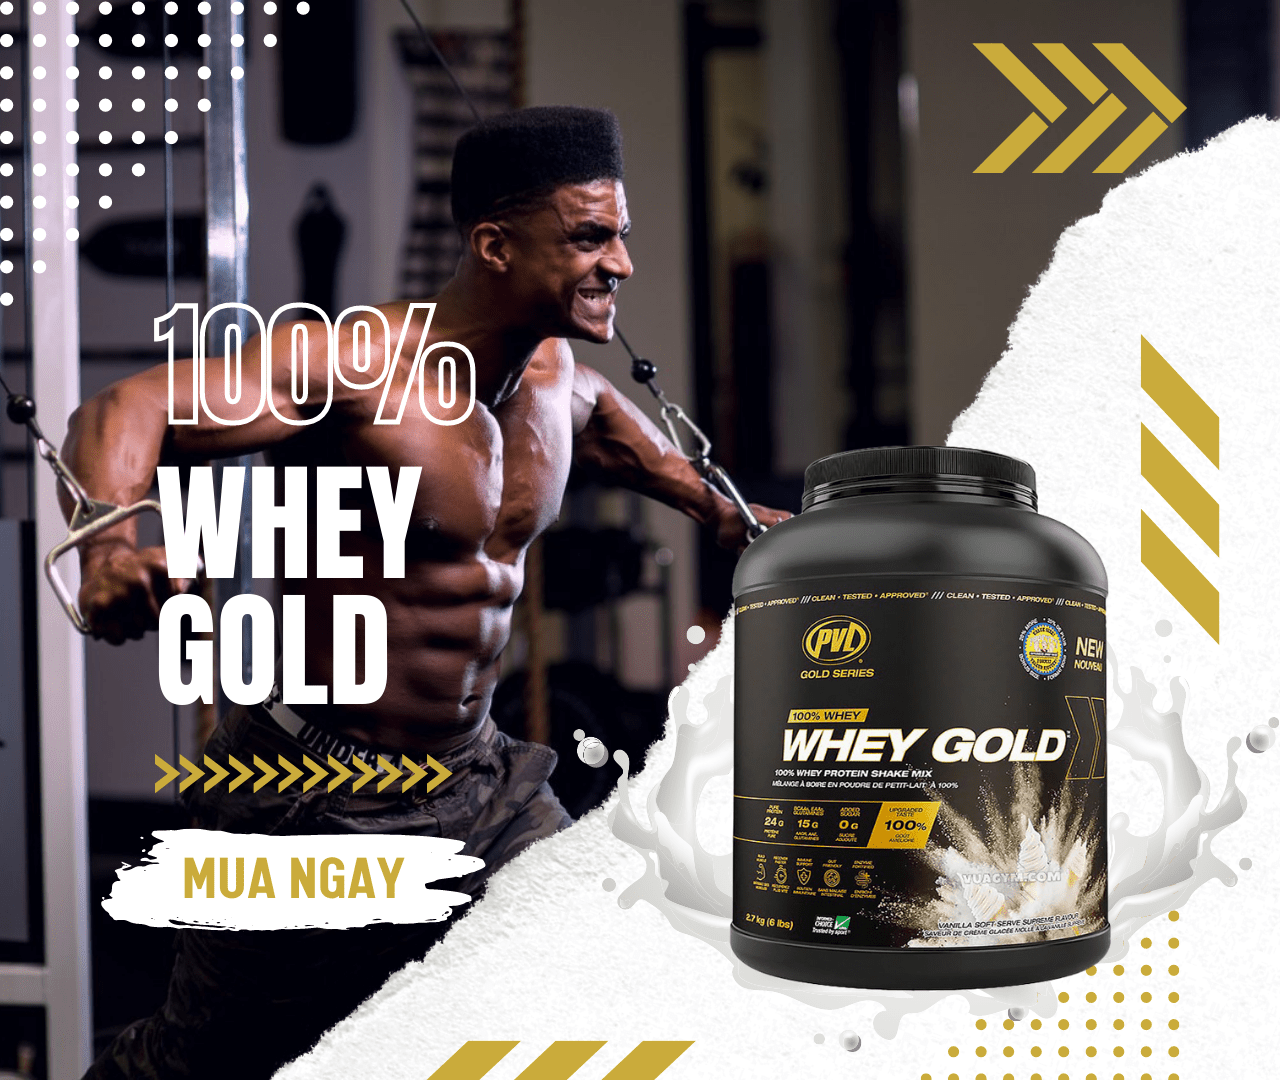 PVL - Whey Gold (6 Lbs) - pvl wwhey gold 1